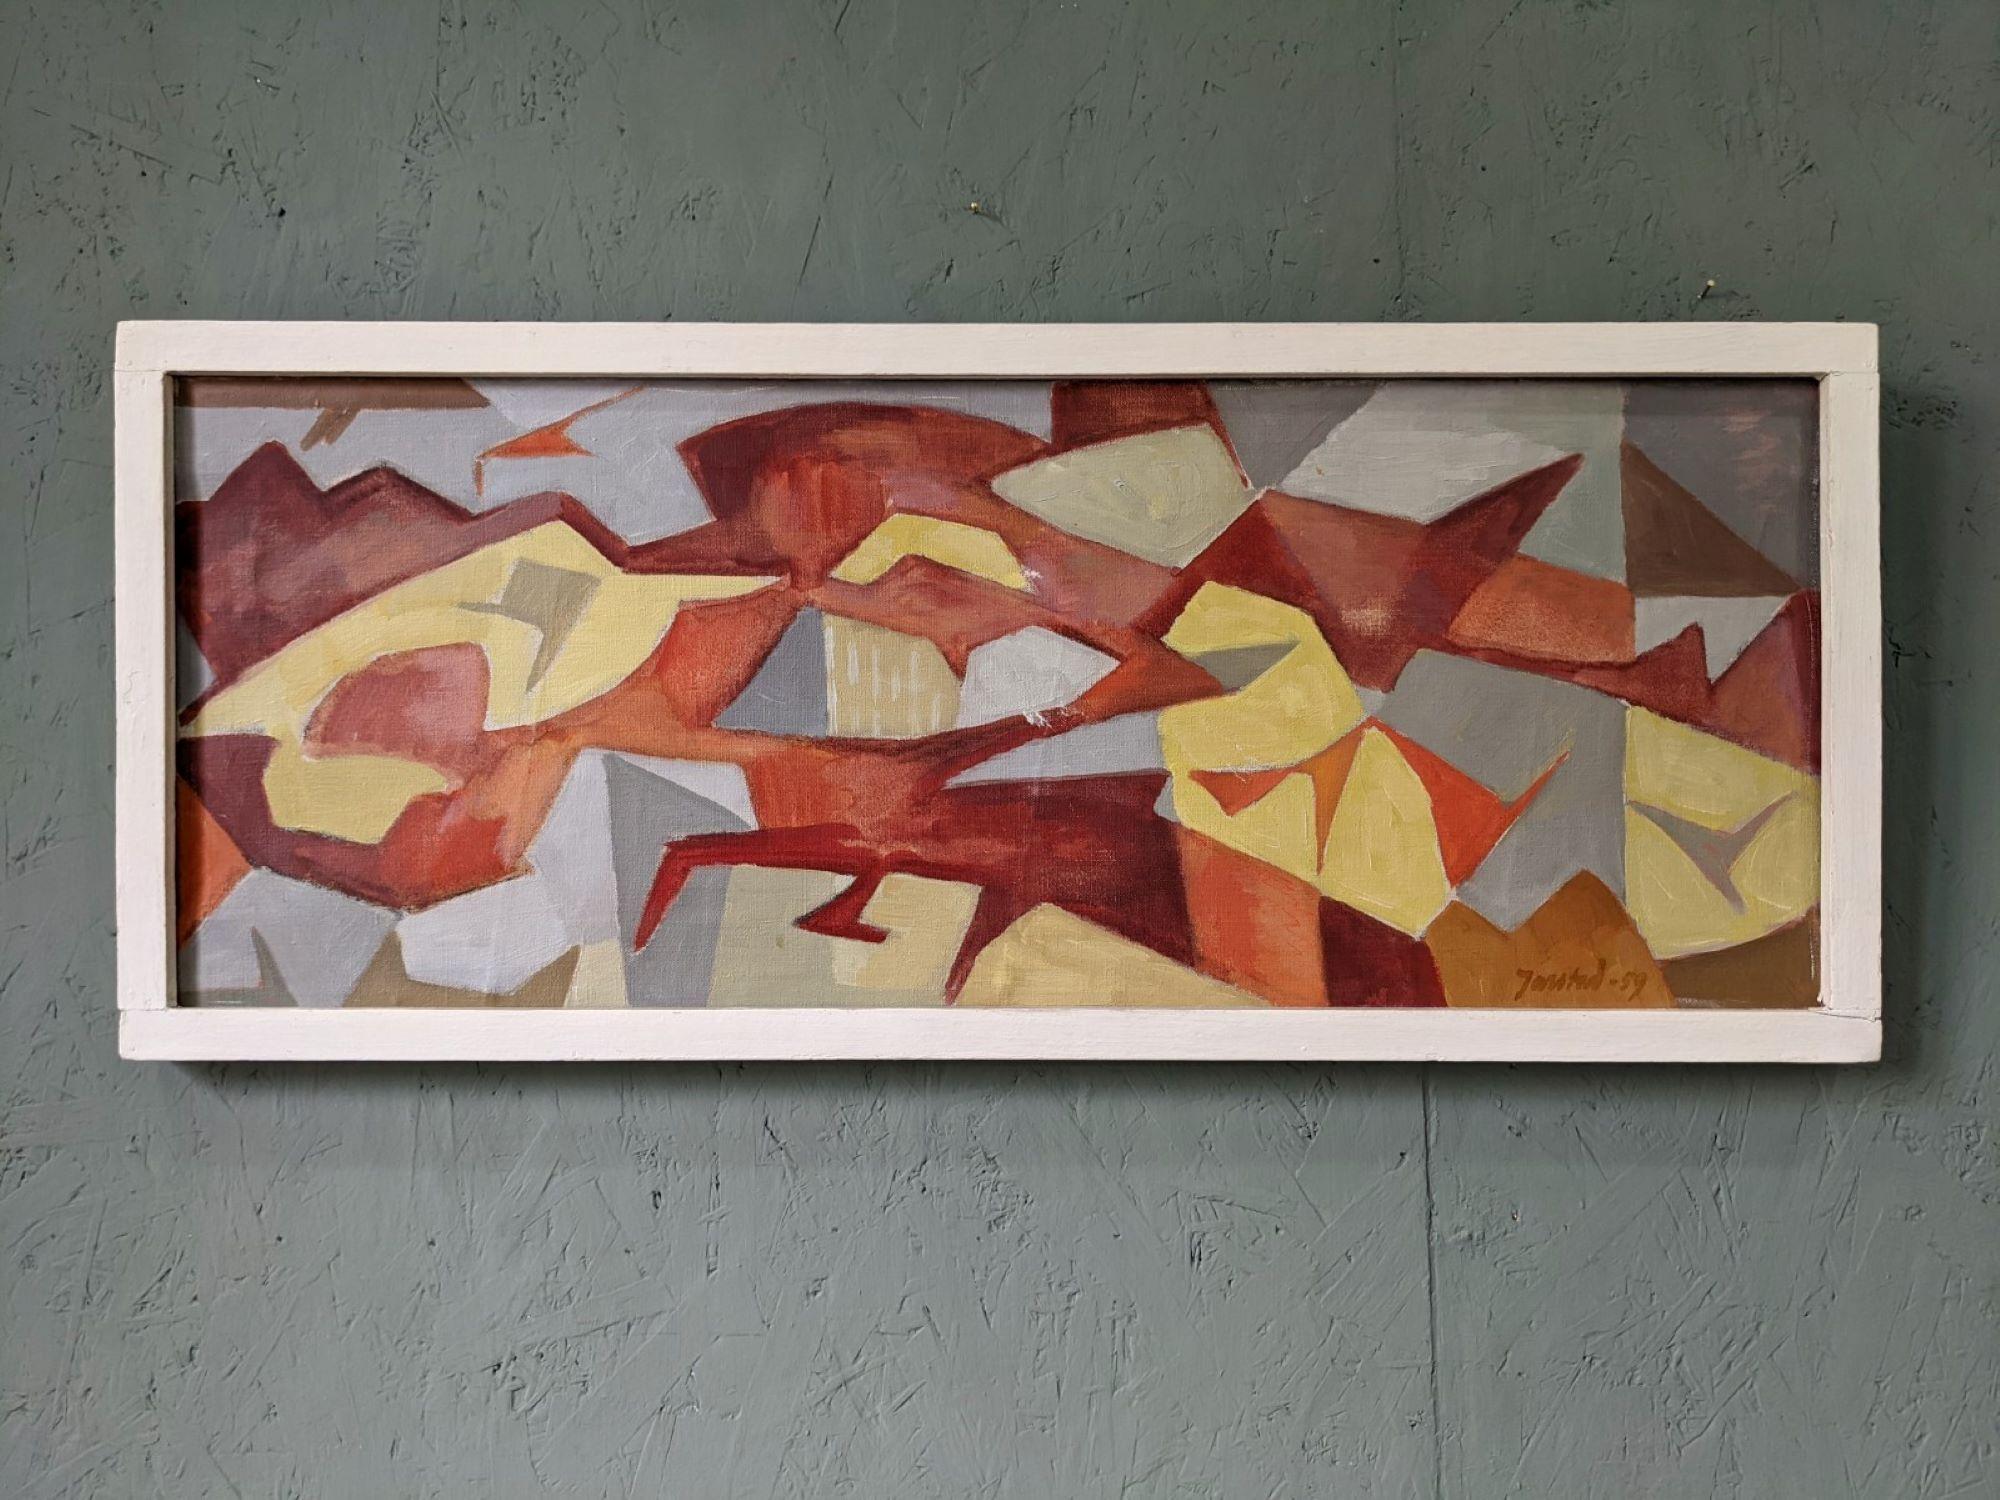 Vintage Mid-Century Modern Swedish Abstract Oil Painting - Jigsaw, Framed, 1959 - Brown Abstract Painting by Unknown